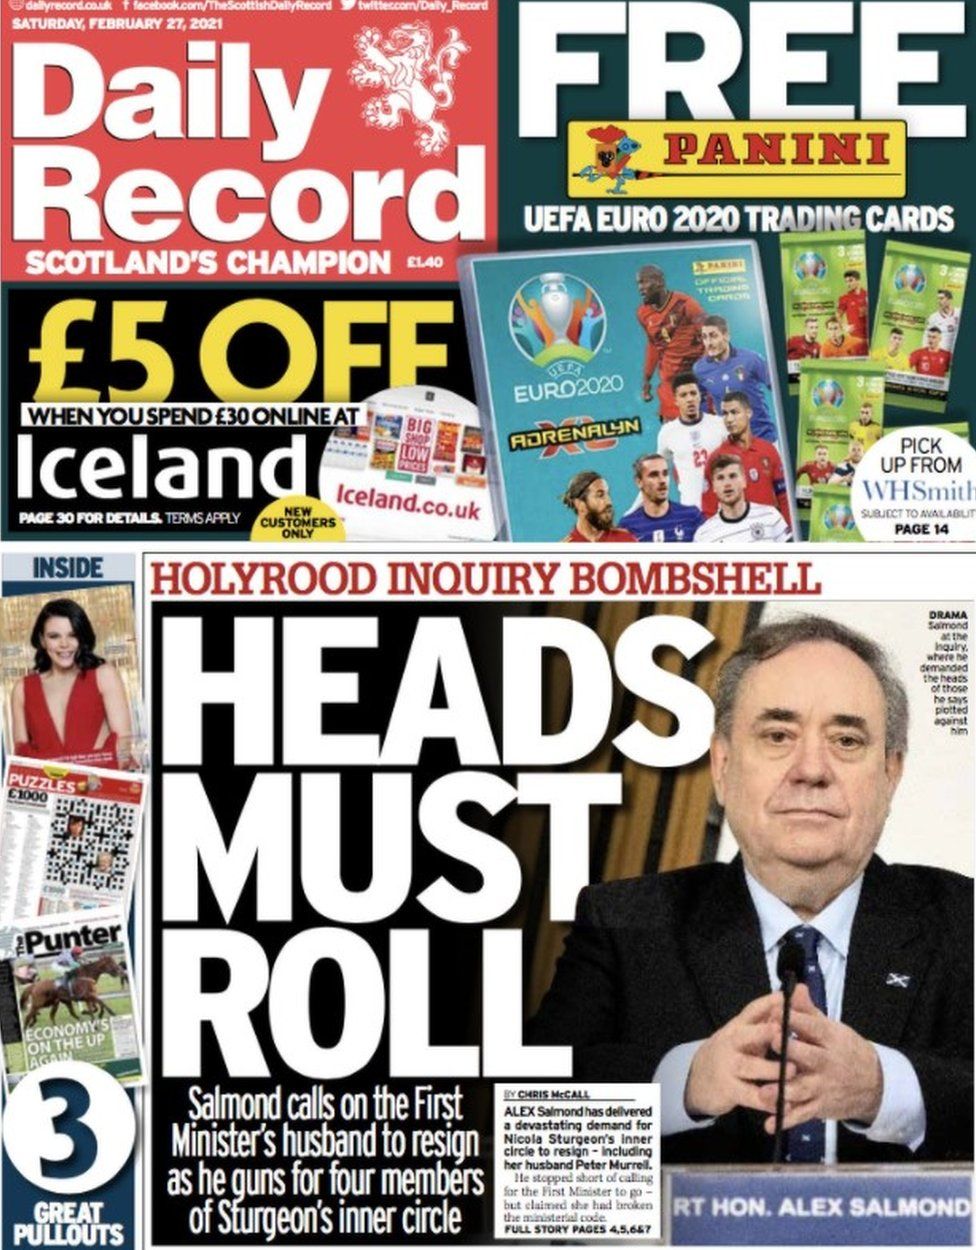 DAILY RECORD